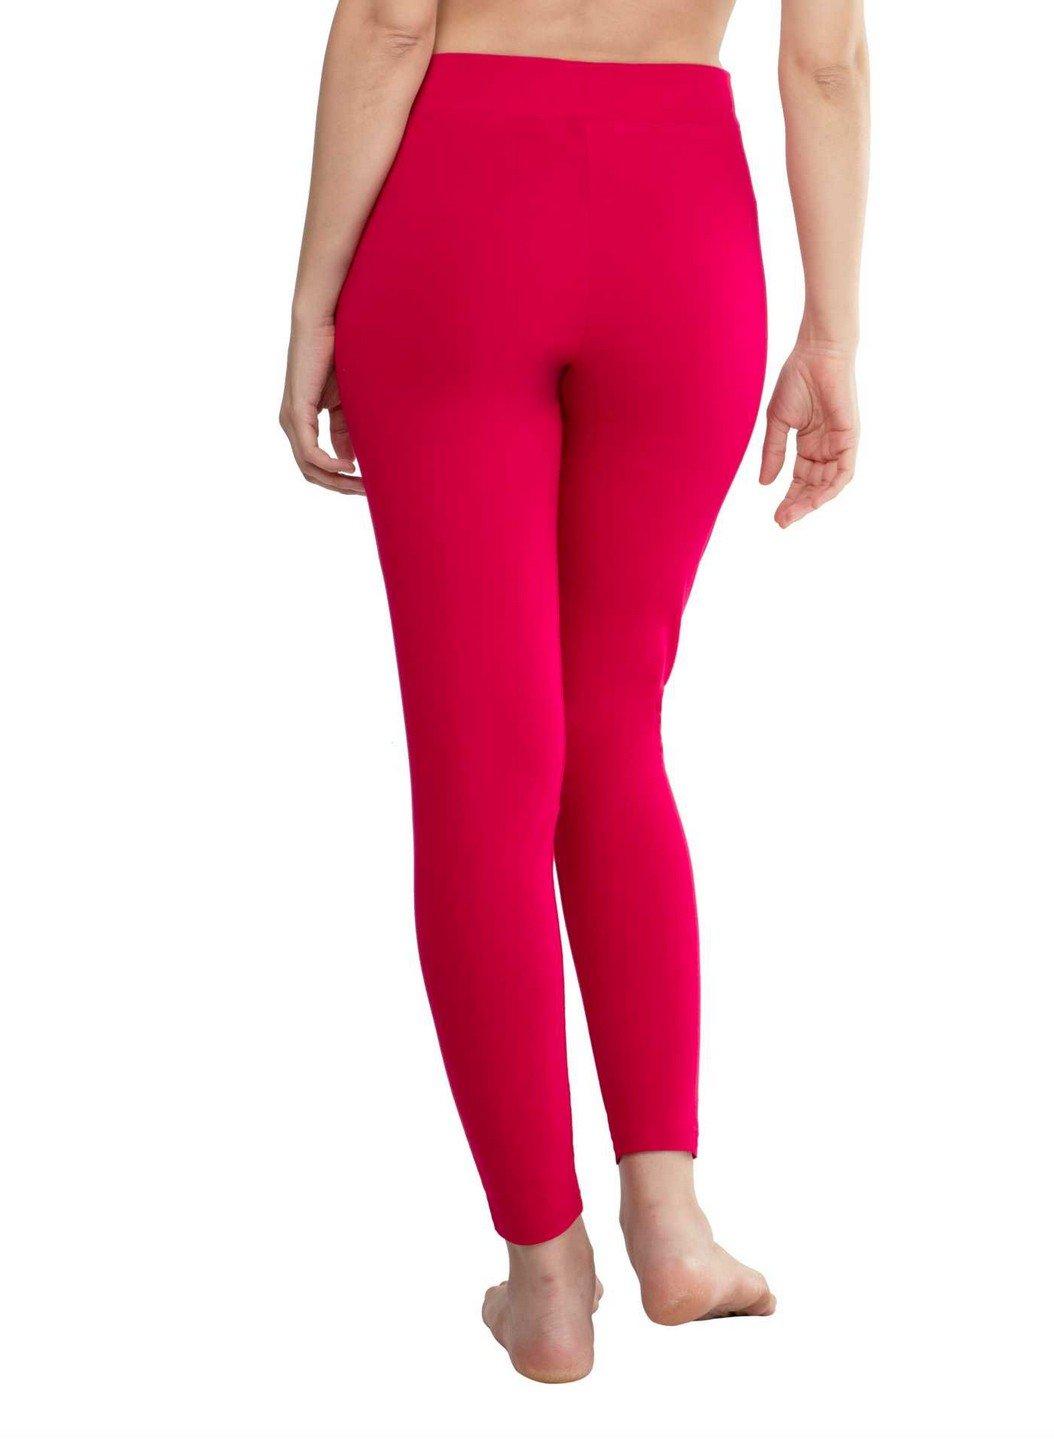 Cotton Pink Gym Wear Tights Yoga Pants With Pockets - Stilento